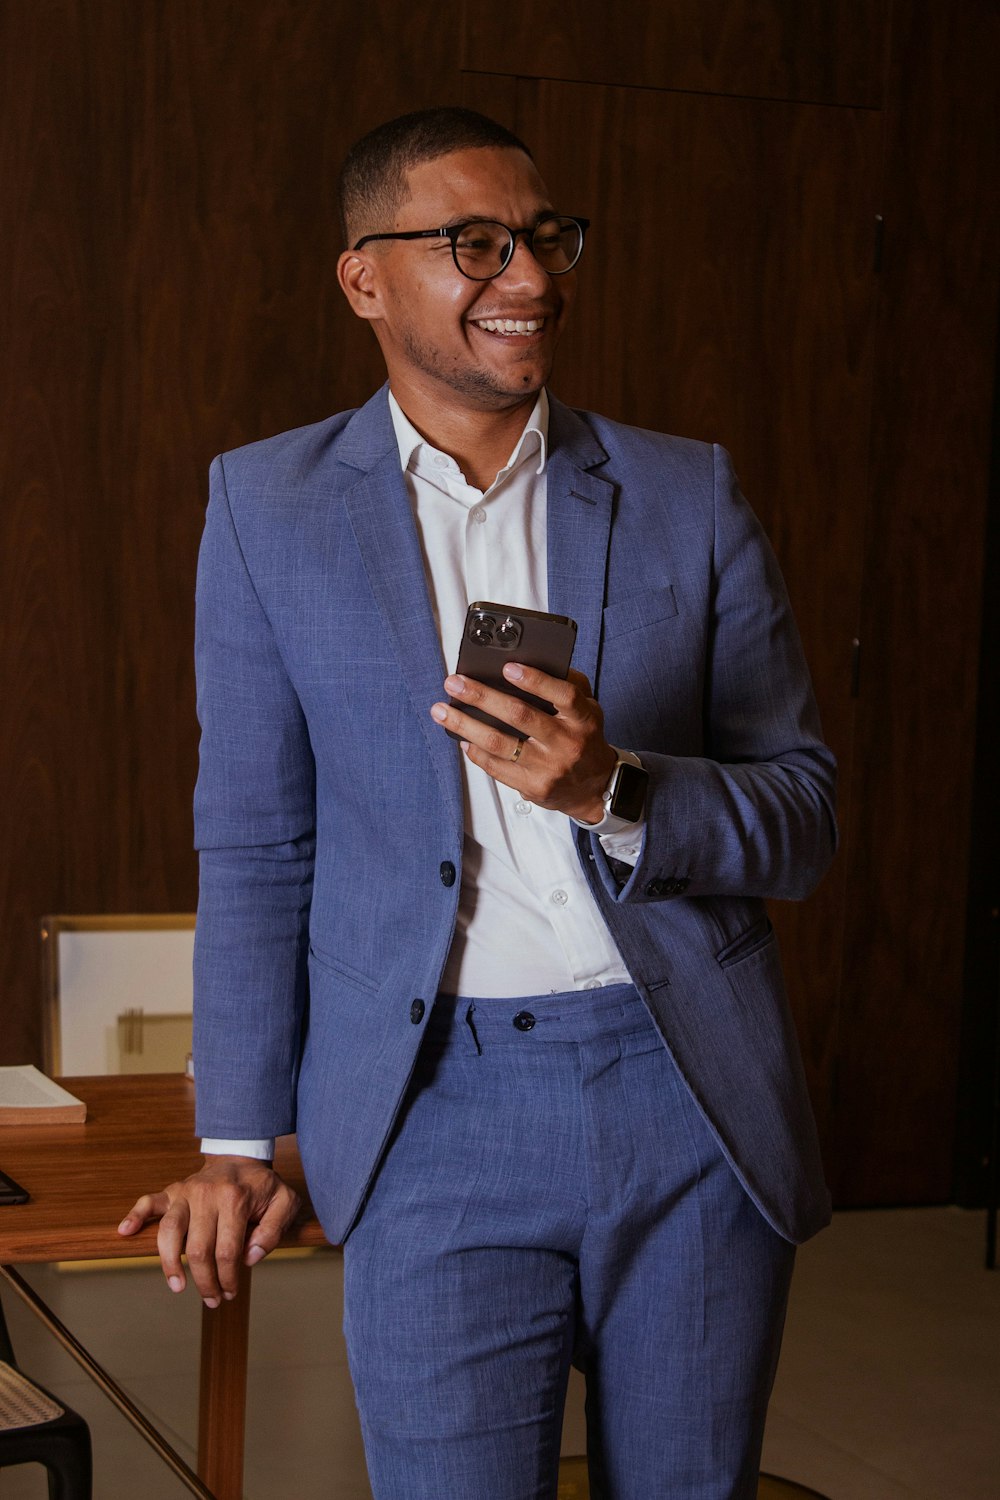 a man in a blue suit holding a smart phone